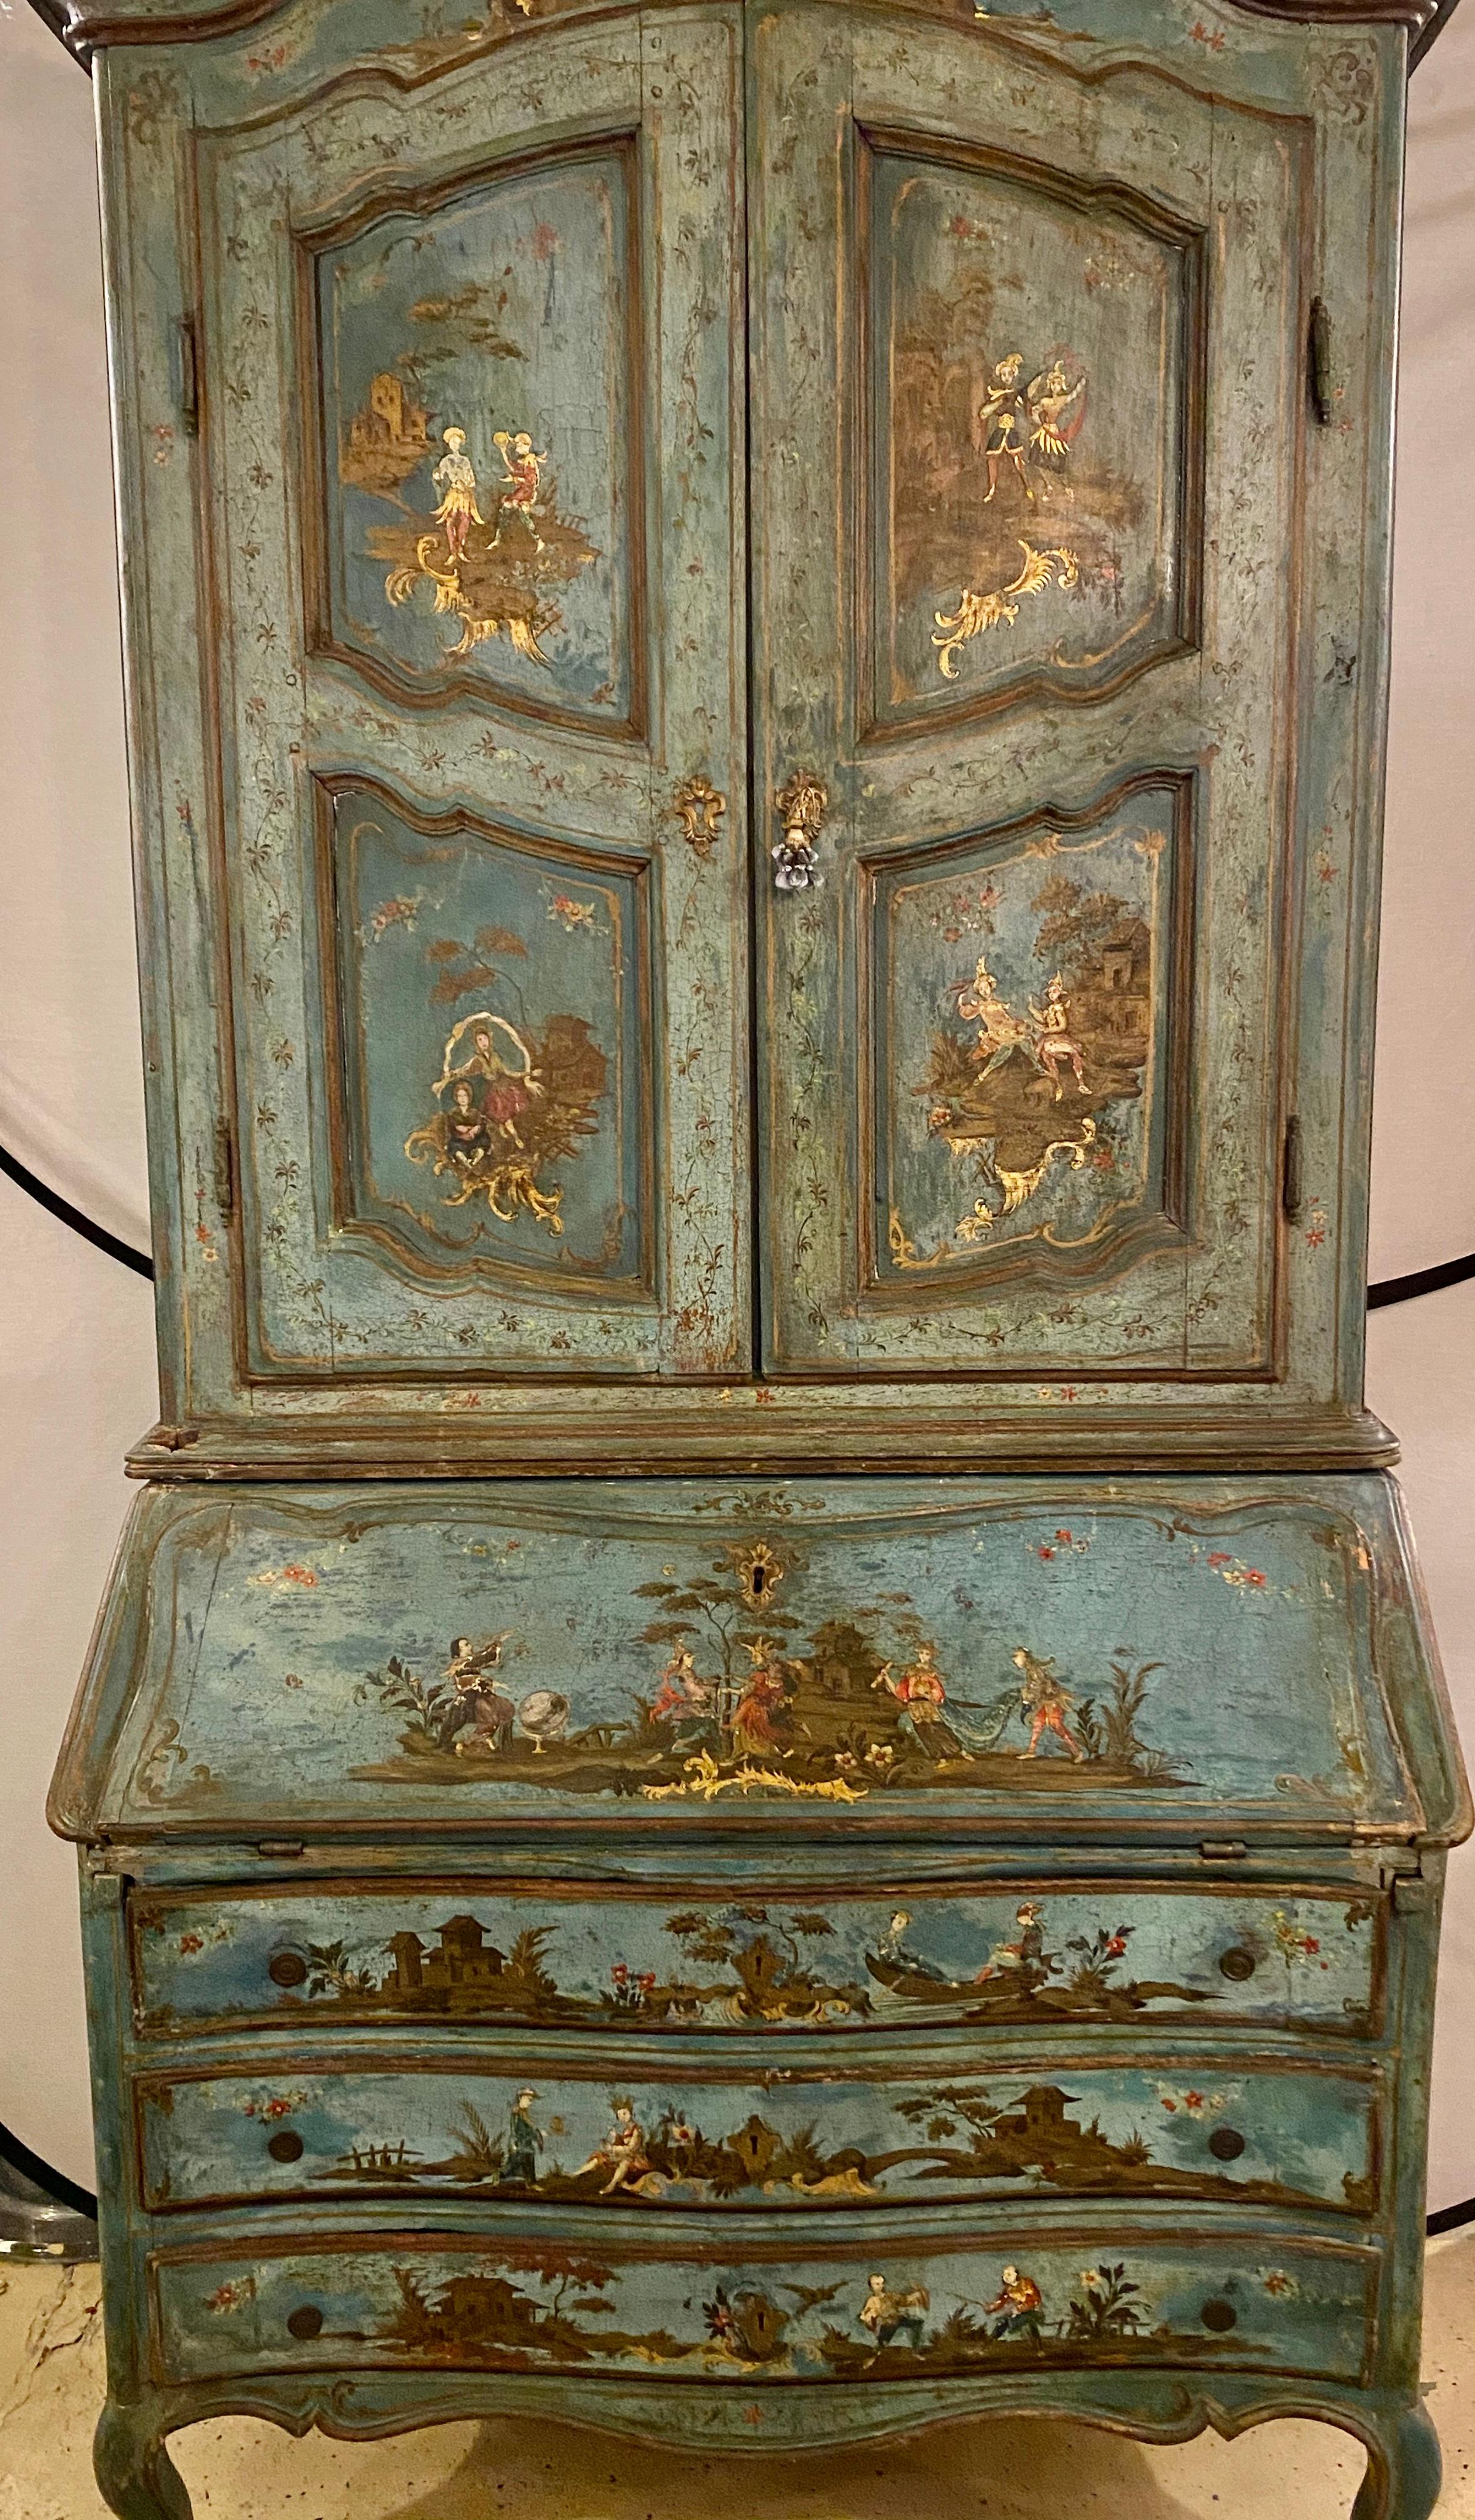 18th century chinoiserie Italian two piece secretary desk / bookcase. This spectacular one of a kind blu paint decorated 18th century chinoiserie Italian two-piece secretary desk is in exceptional condition considering its age. The three draw flip